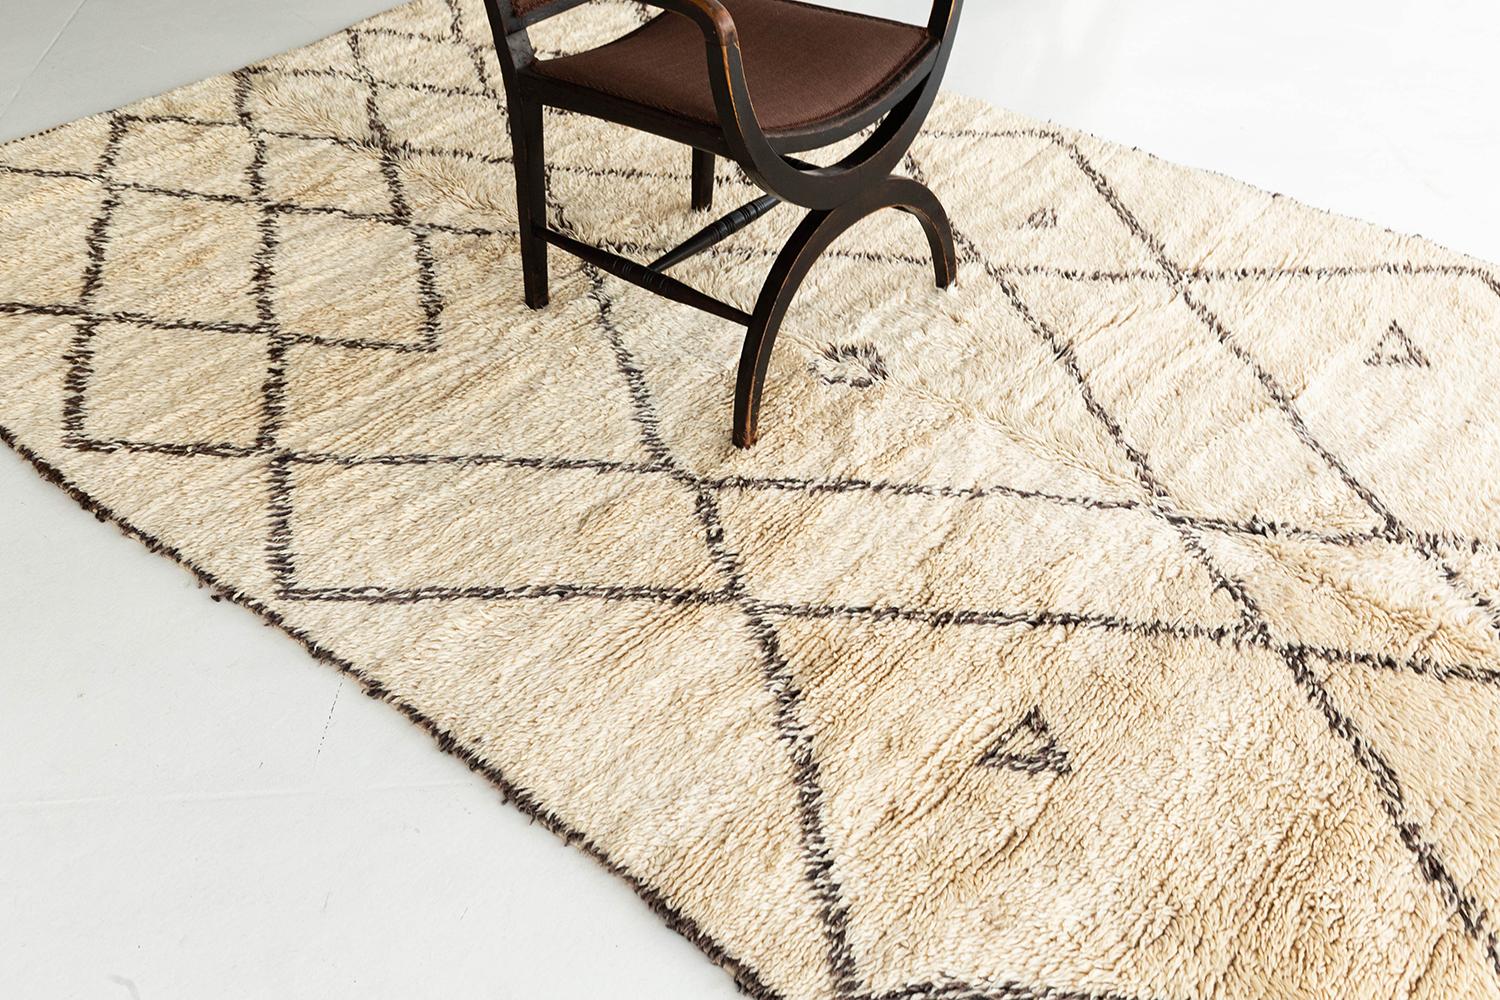 A charming antique Moroccan rug made by the Beni Ourain Tribe. This unique handwoven rug contains traditional line-work latticed throughout the field with symbolic imagery. Beni Ourain tribal rugs are known for their soft black or dark brown